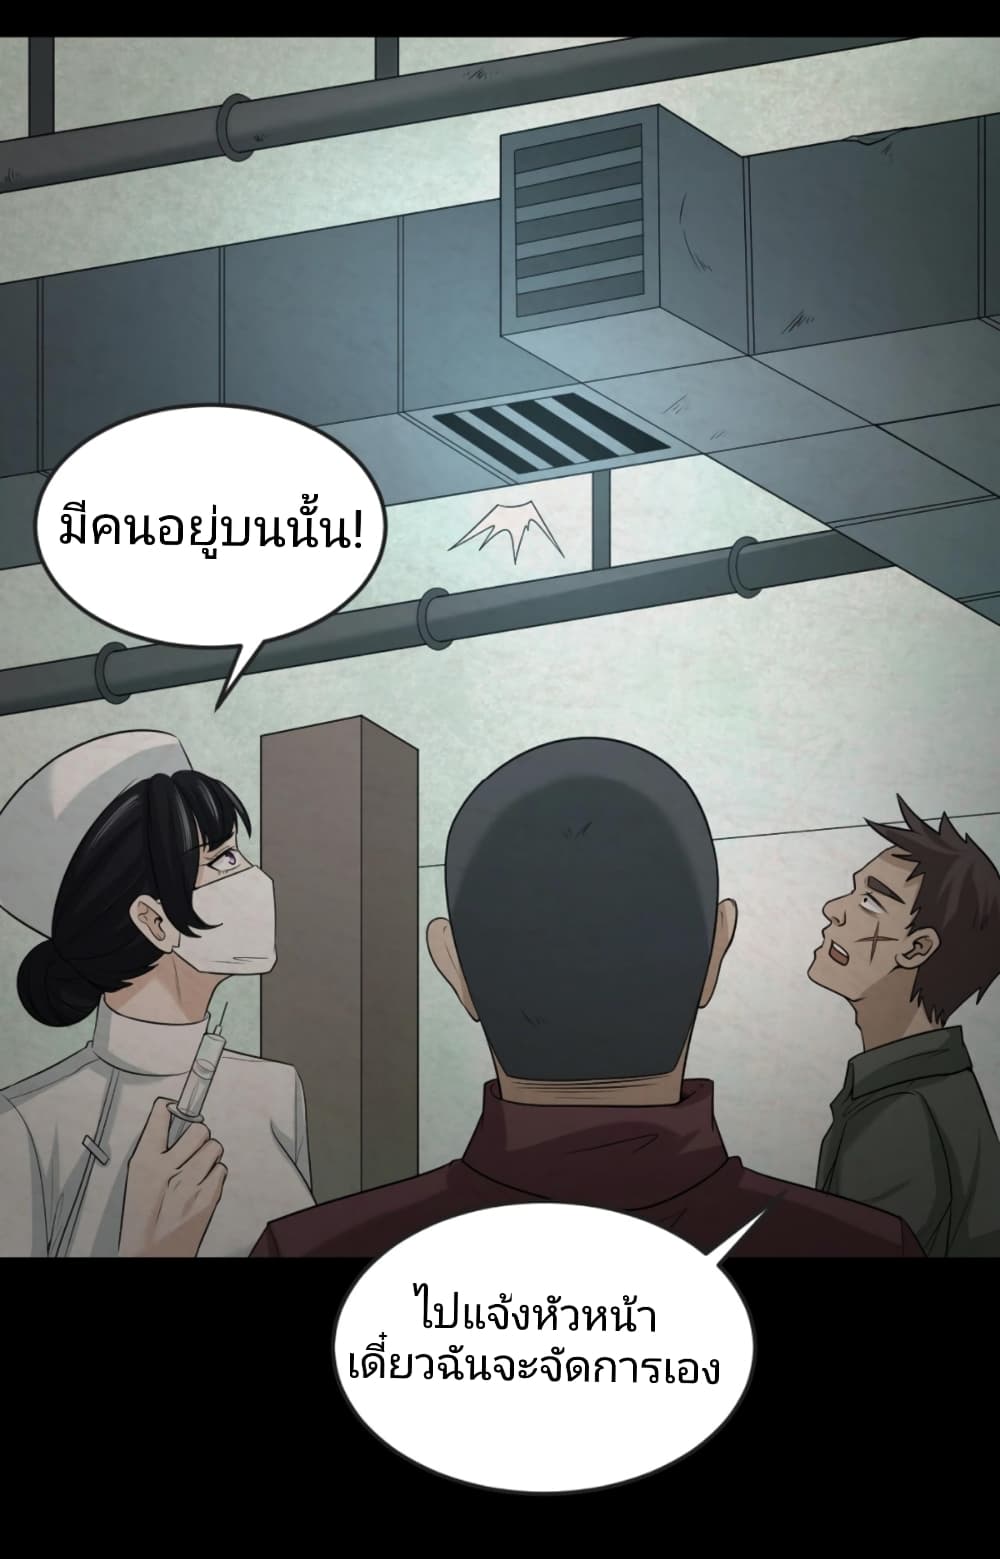 The Age of Ghost Spirits à¸à¸­à¸à¸à¸µà¹ 32 (26)